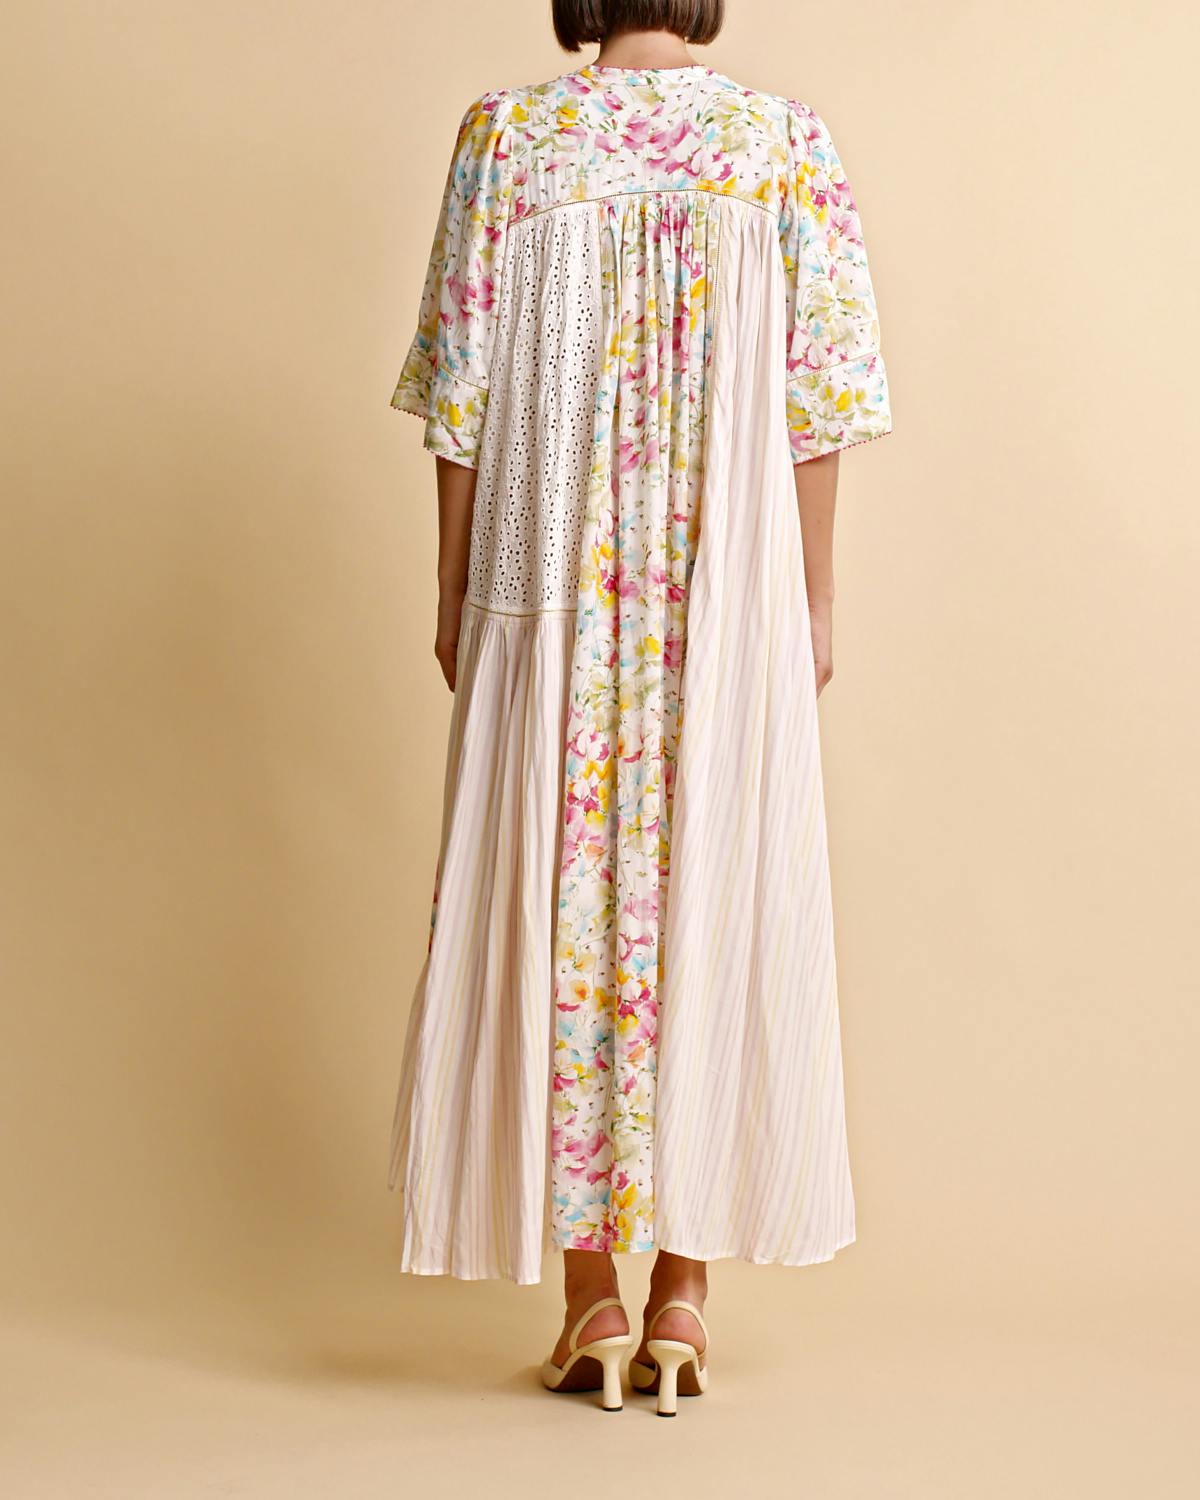 Patchwork Maxi Dress, Bright Flowers. Image #5